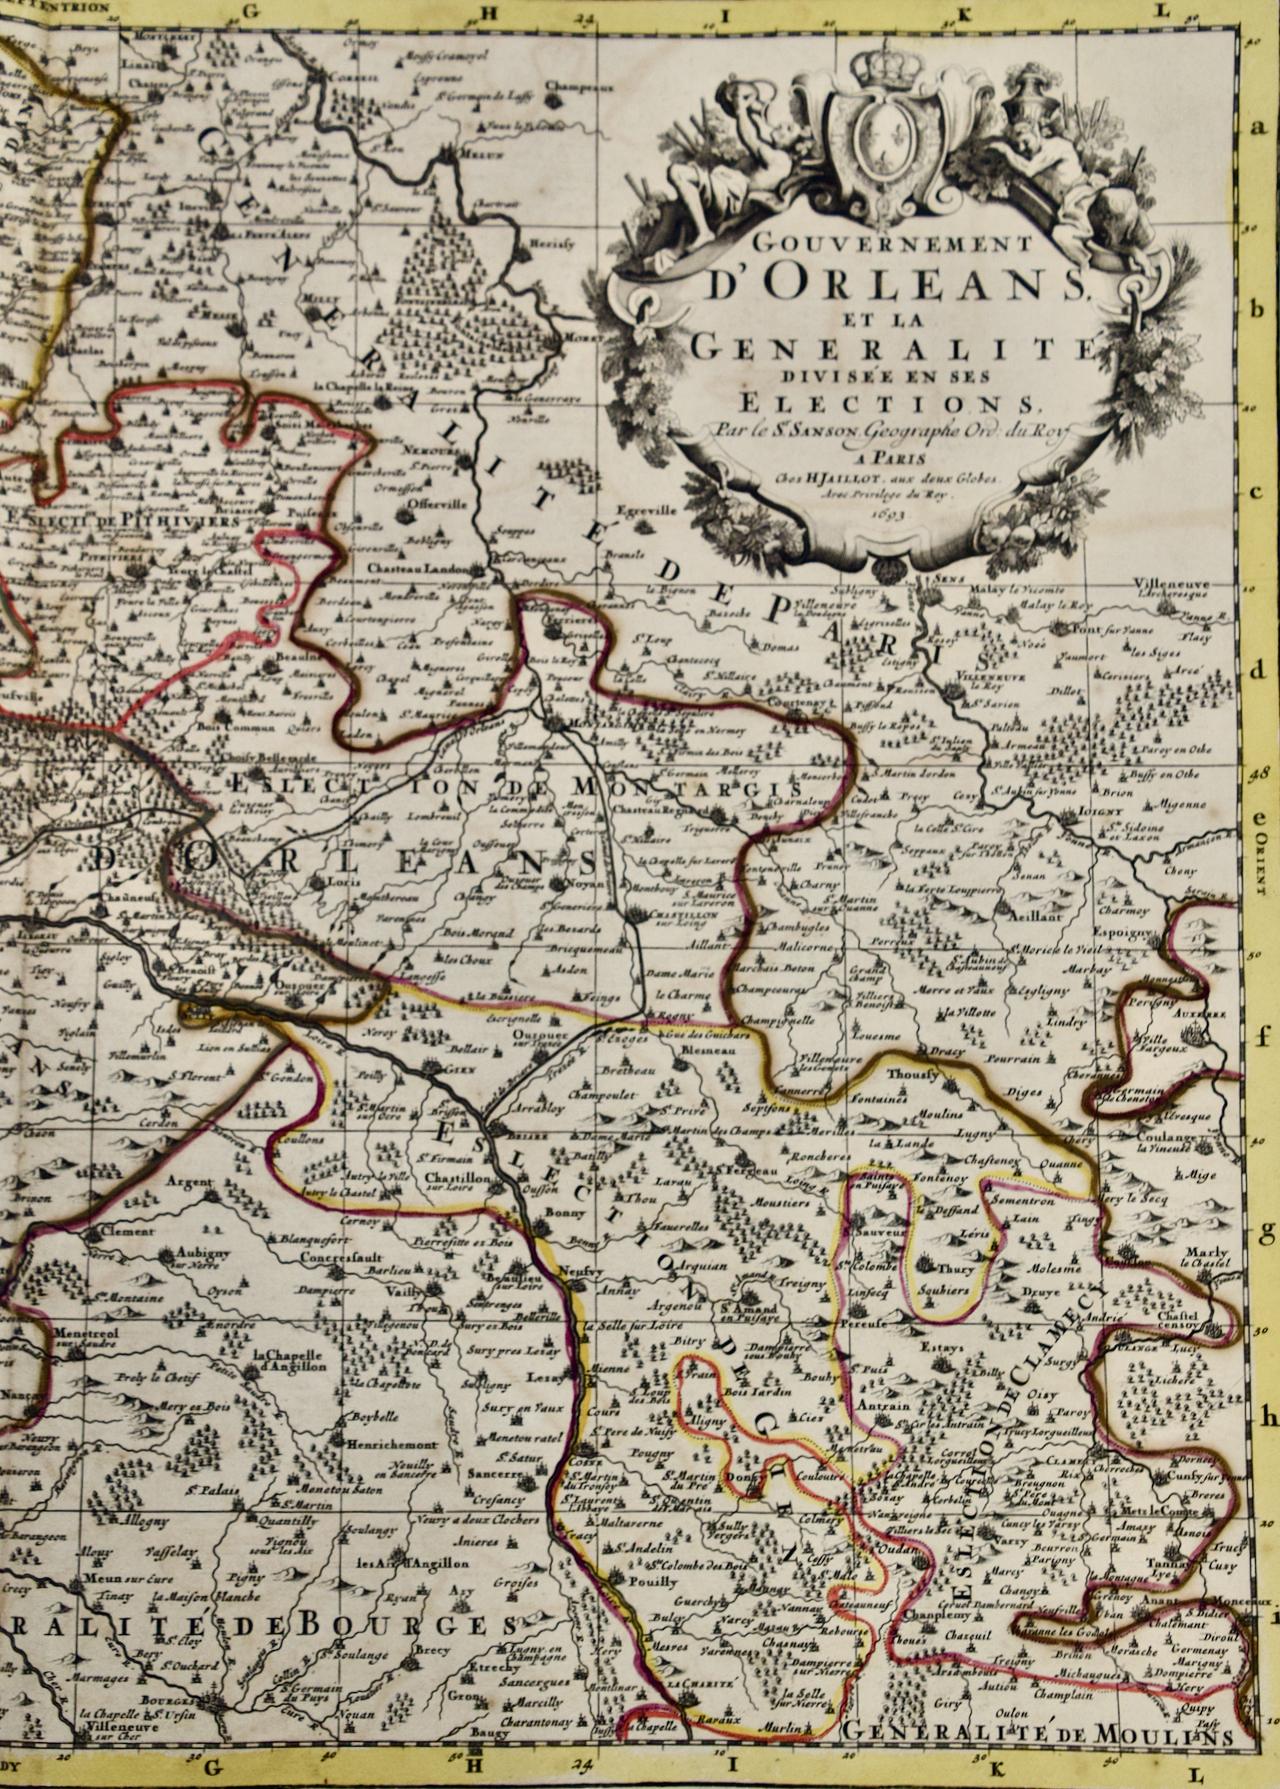 The Loire Valley of France: A 17th C. Hand-colored Map by Sanson and Jaillot For Sale 1